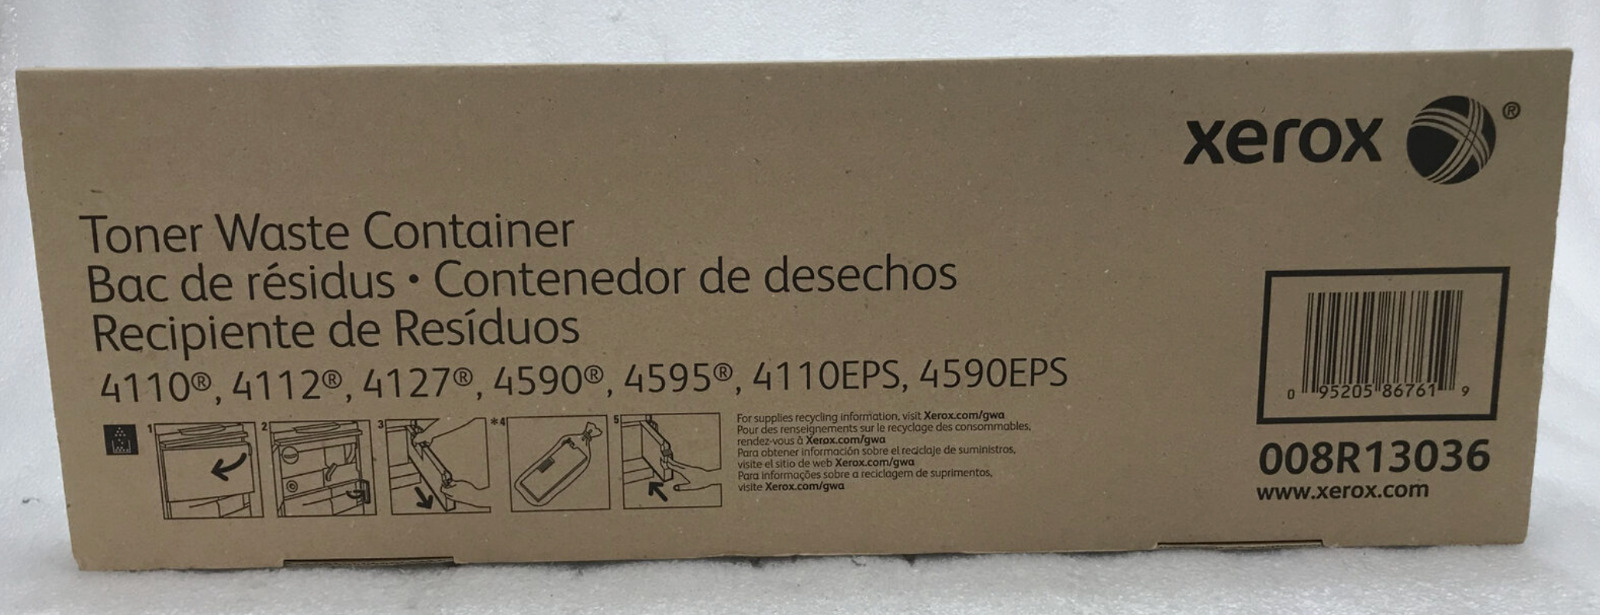 Xerox 008R13036 Waste Toner Container Brand New